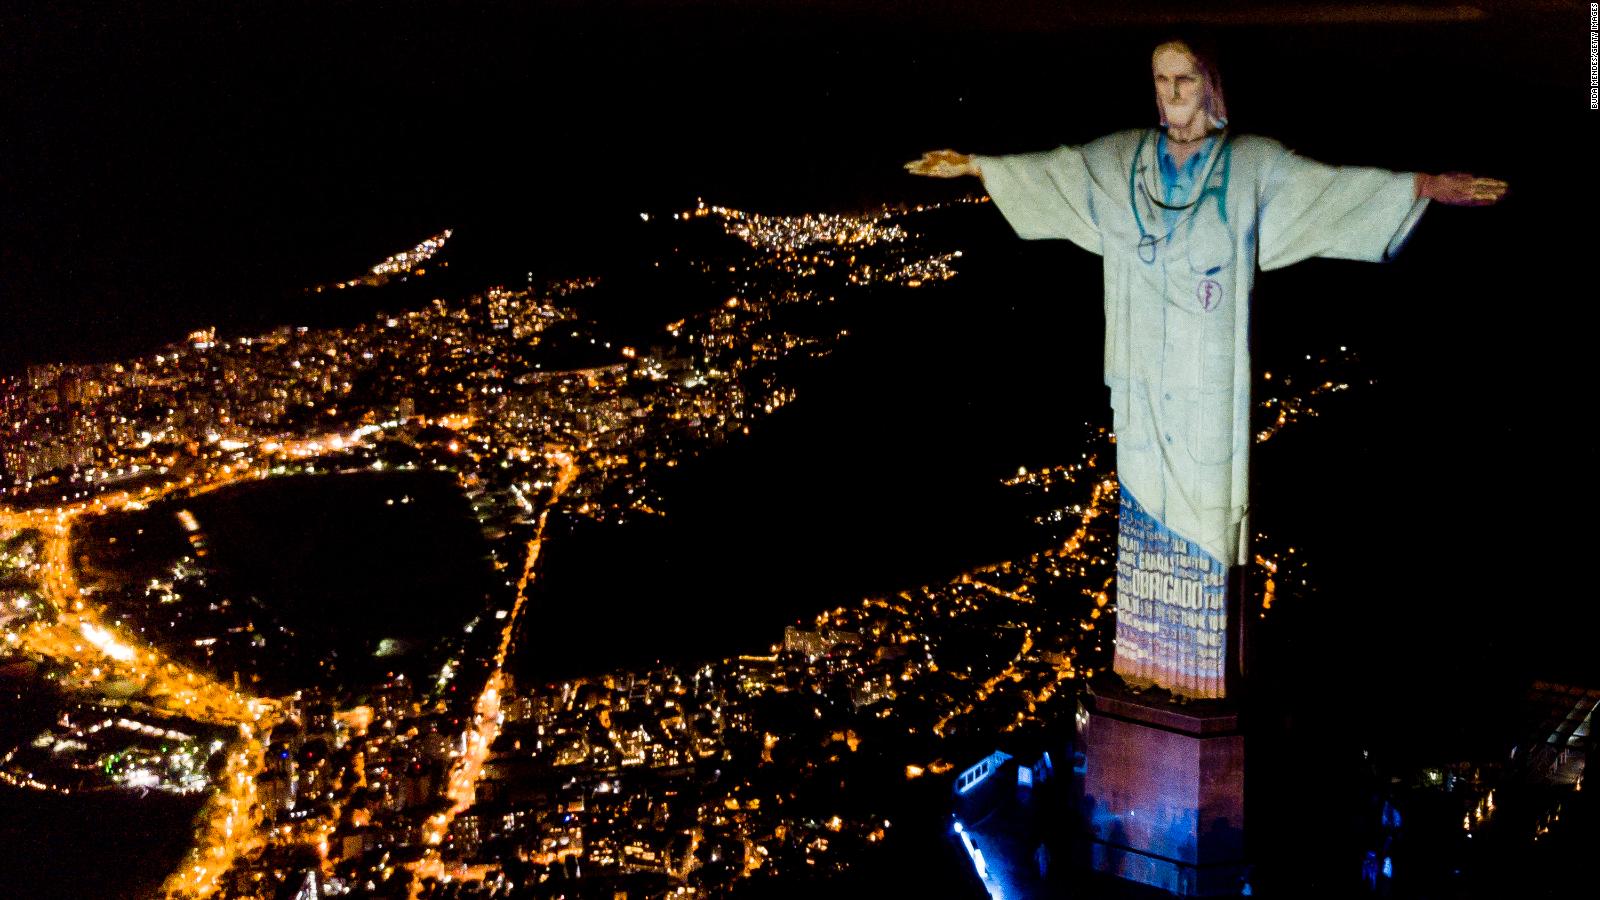 See Rio's Christ the Redeemer statue lit up as a doctor - CNN Video